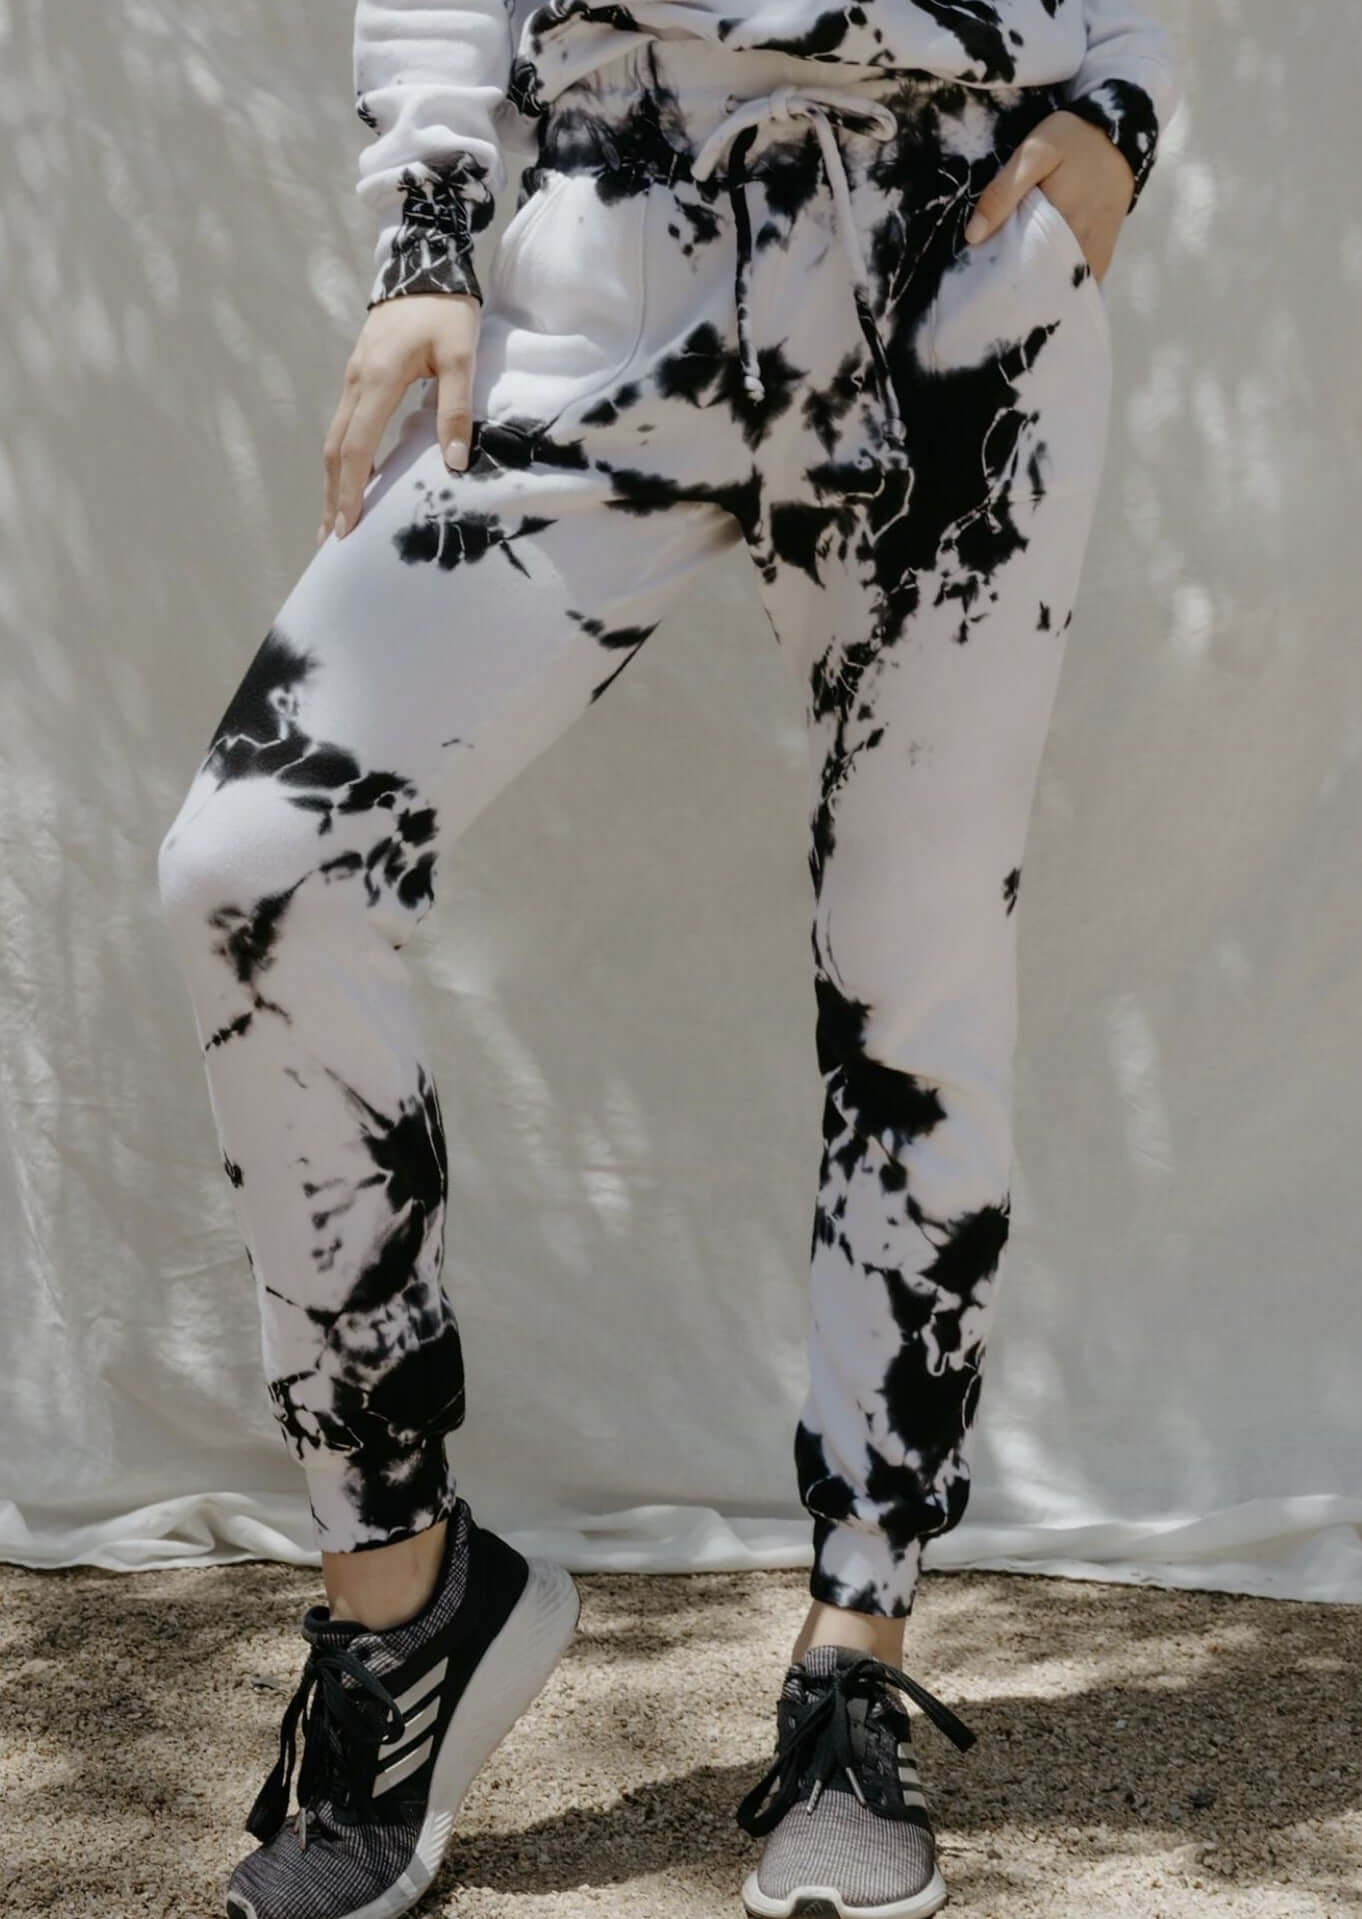 Jala Black & White Tie Dye Pocket Joggers eco-friendly, ultra soft French terry sponge fleece -Style PJ540F | Made in the USA | Classy Cozy Cool Boutique